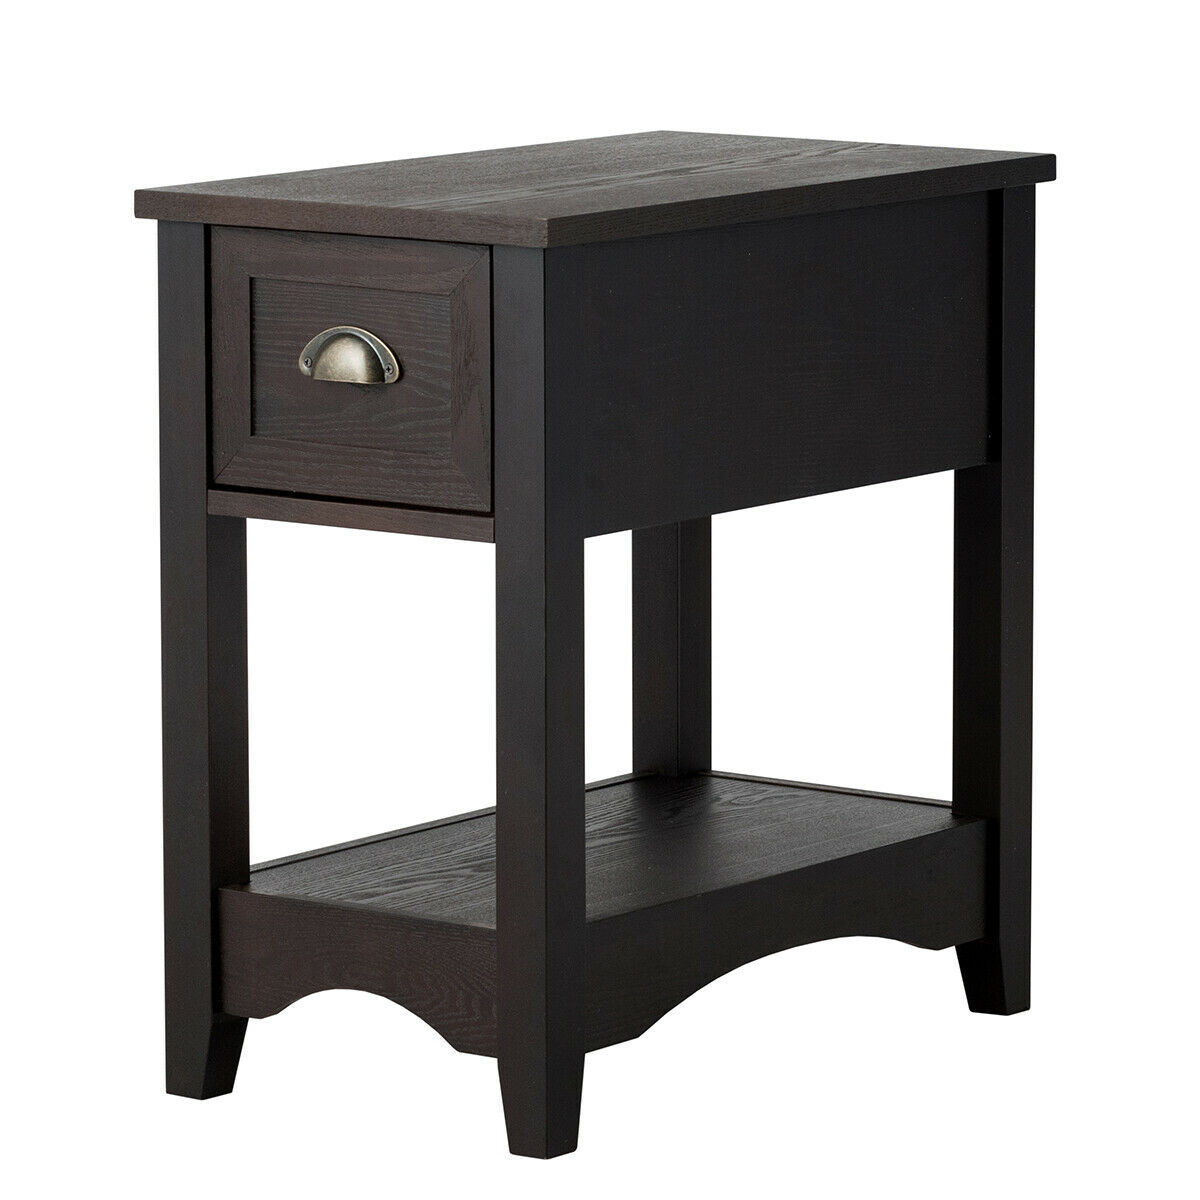 Contemporary Chair Side End Table Compact Table W/ Drawer Nightstand Espresso/Tawny/Walnut - Reddish Brown